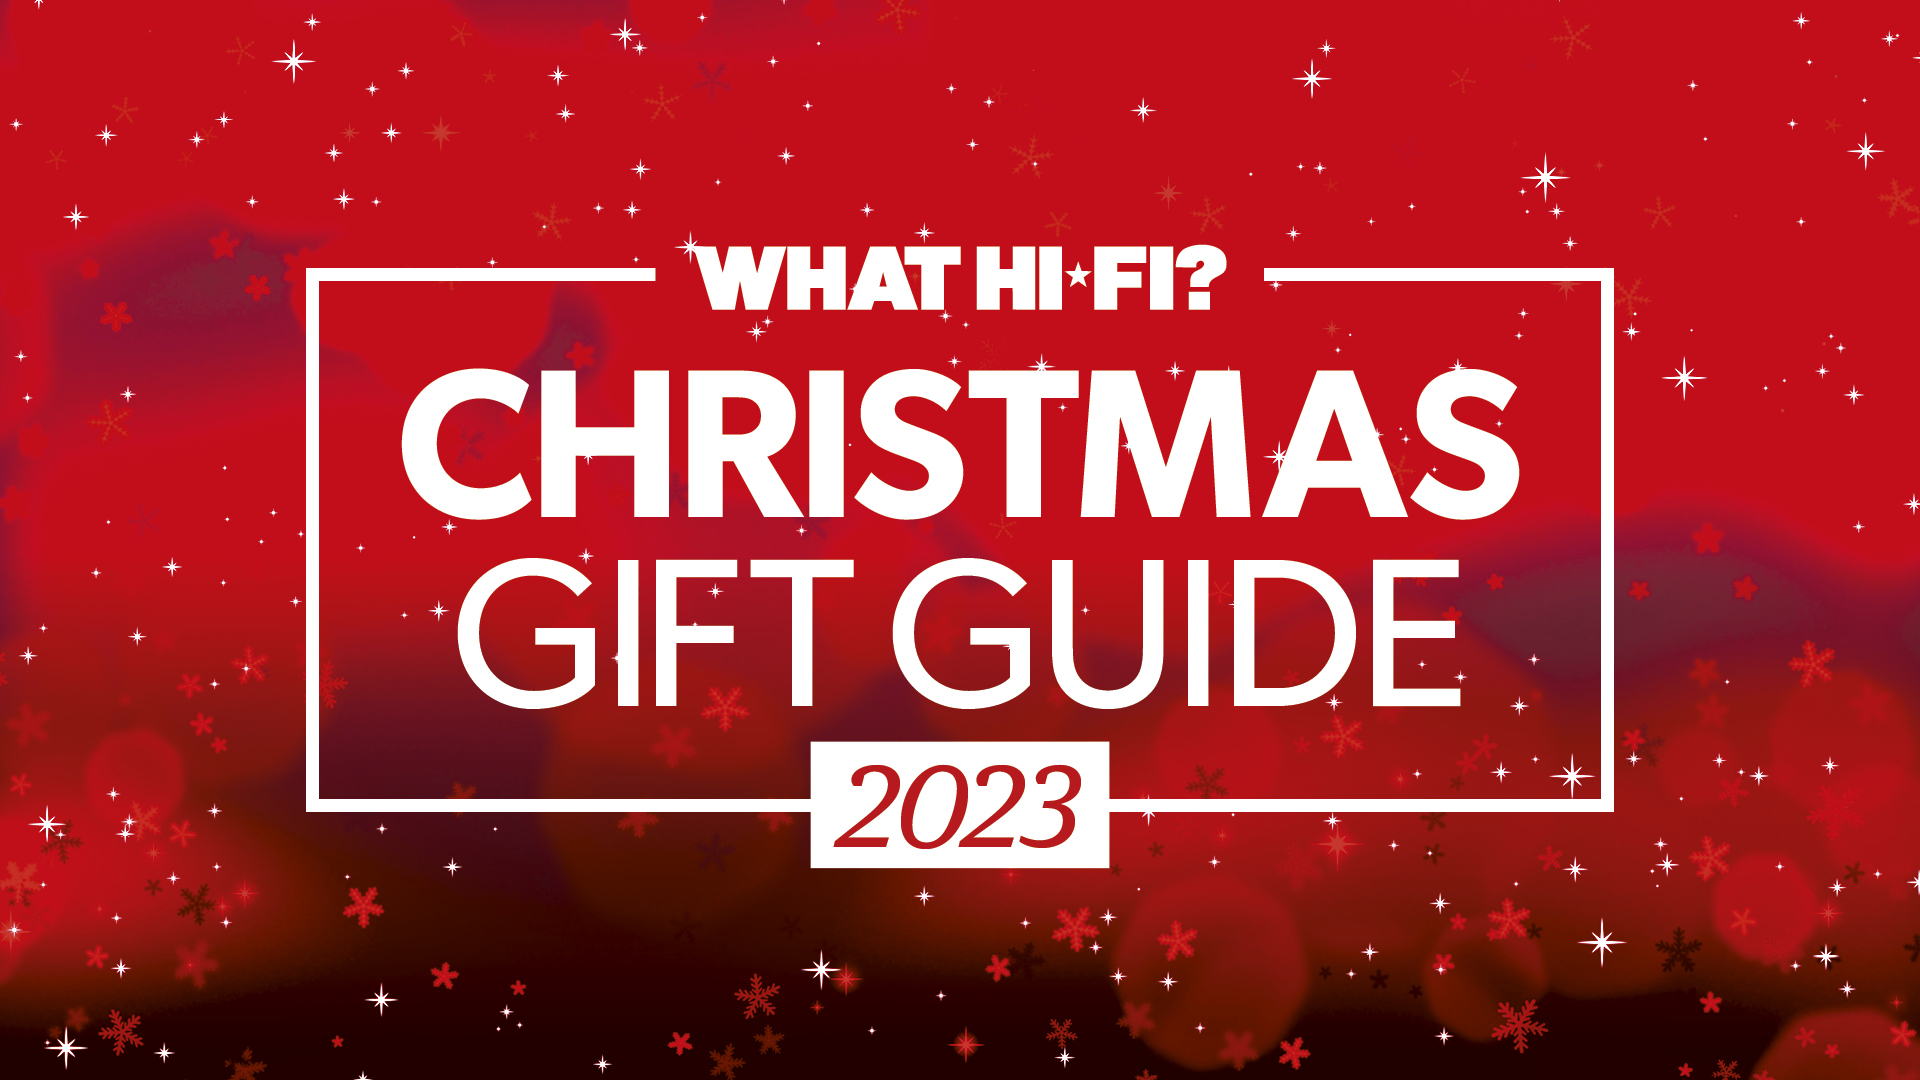 The 91 best Christmas gift ideas to give tech lovers in 2023